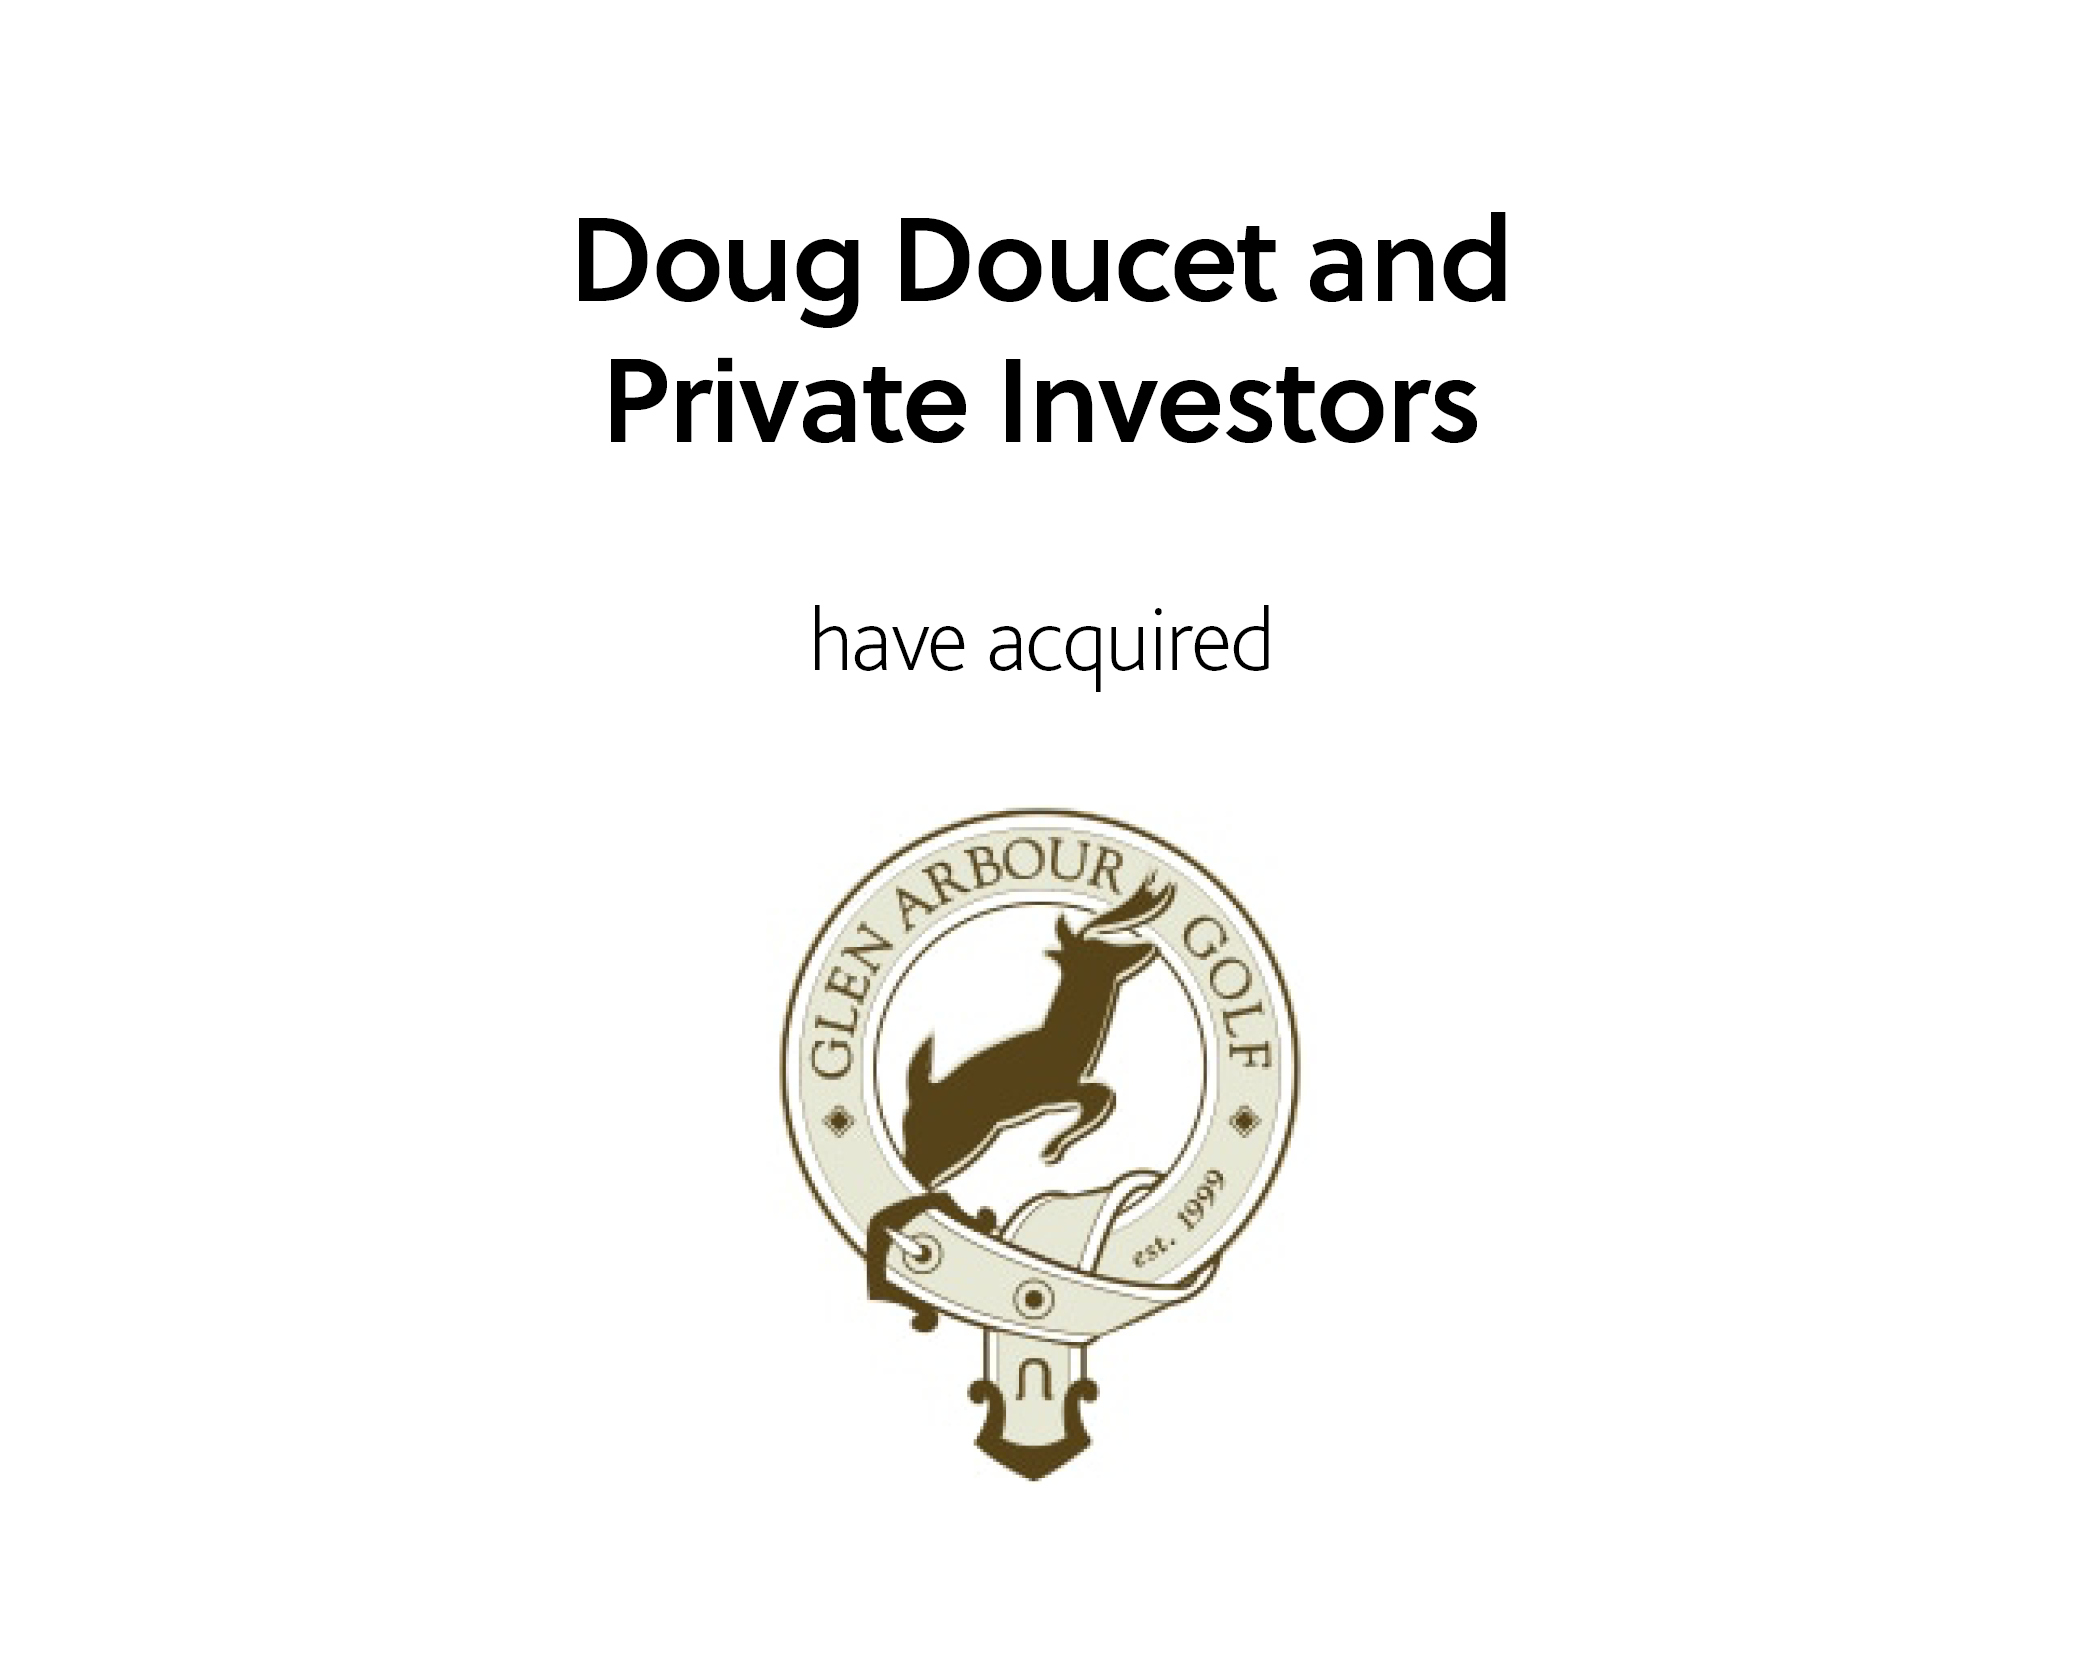 Doug Doucet and Private Investors have acquired Glen Arbour Golf Course